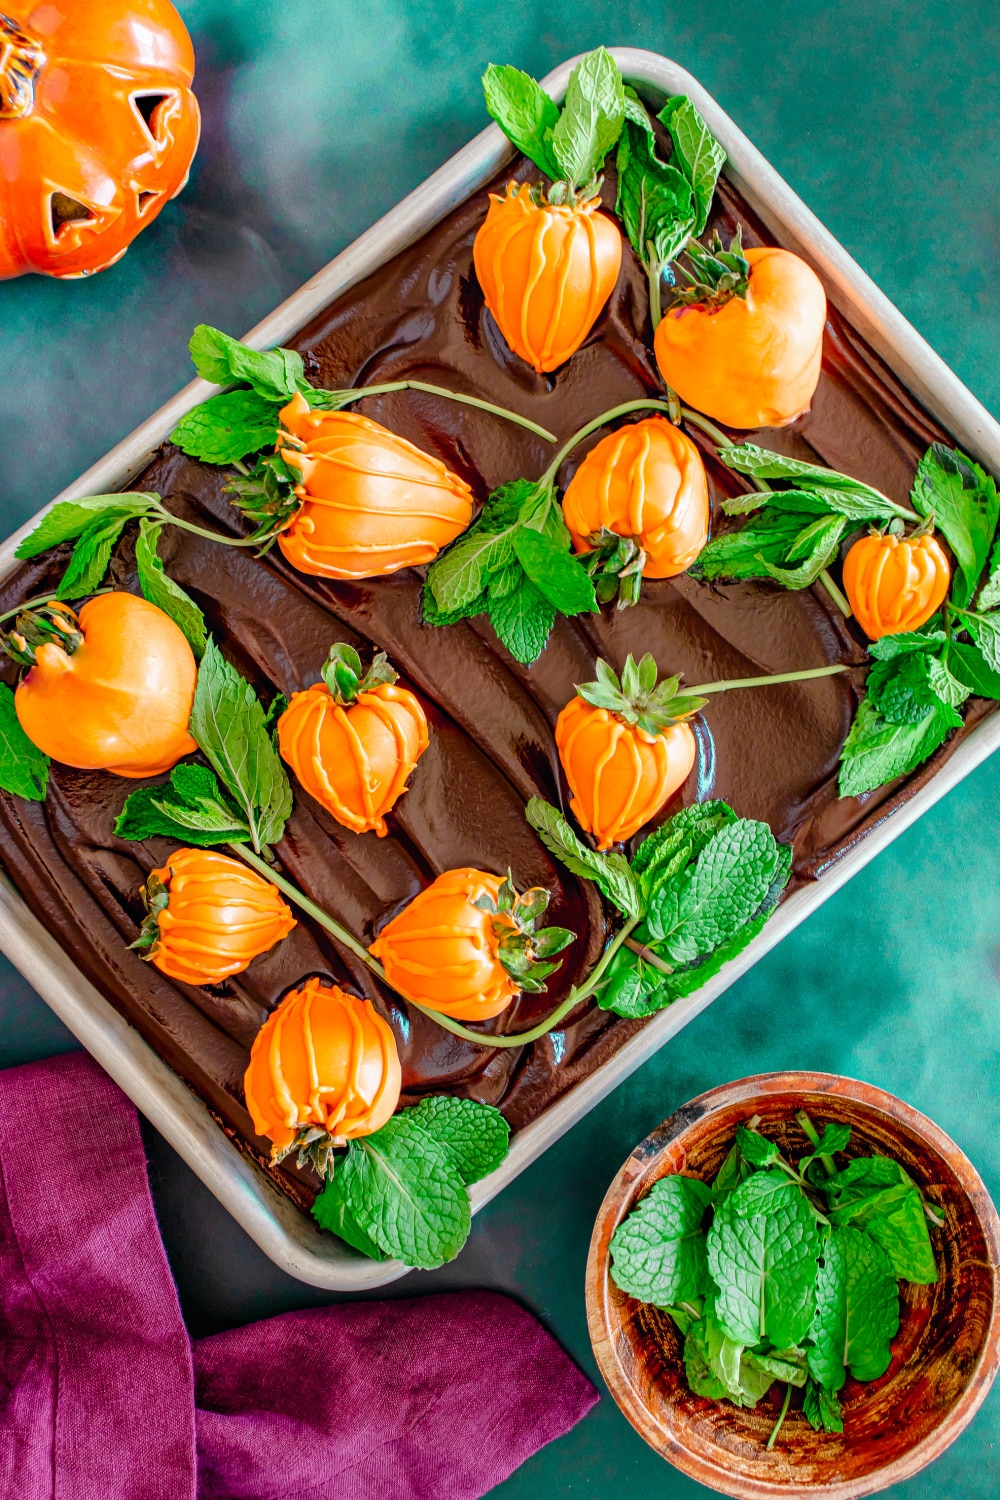 Chocolate brownies with chocolate ganache and orange candy dipped starwberries make a "pumpkin patch" in a baking pan.